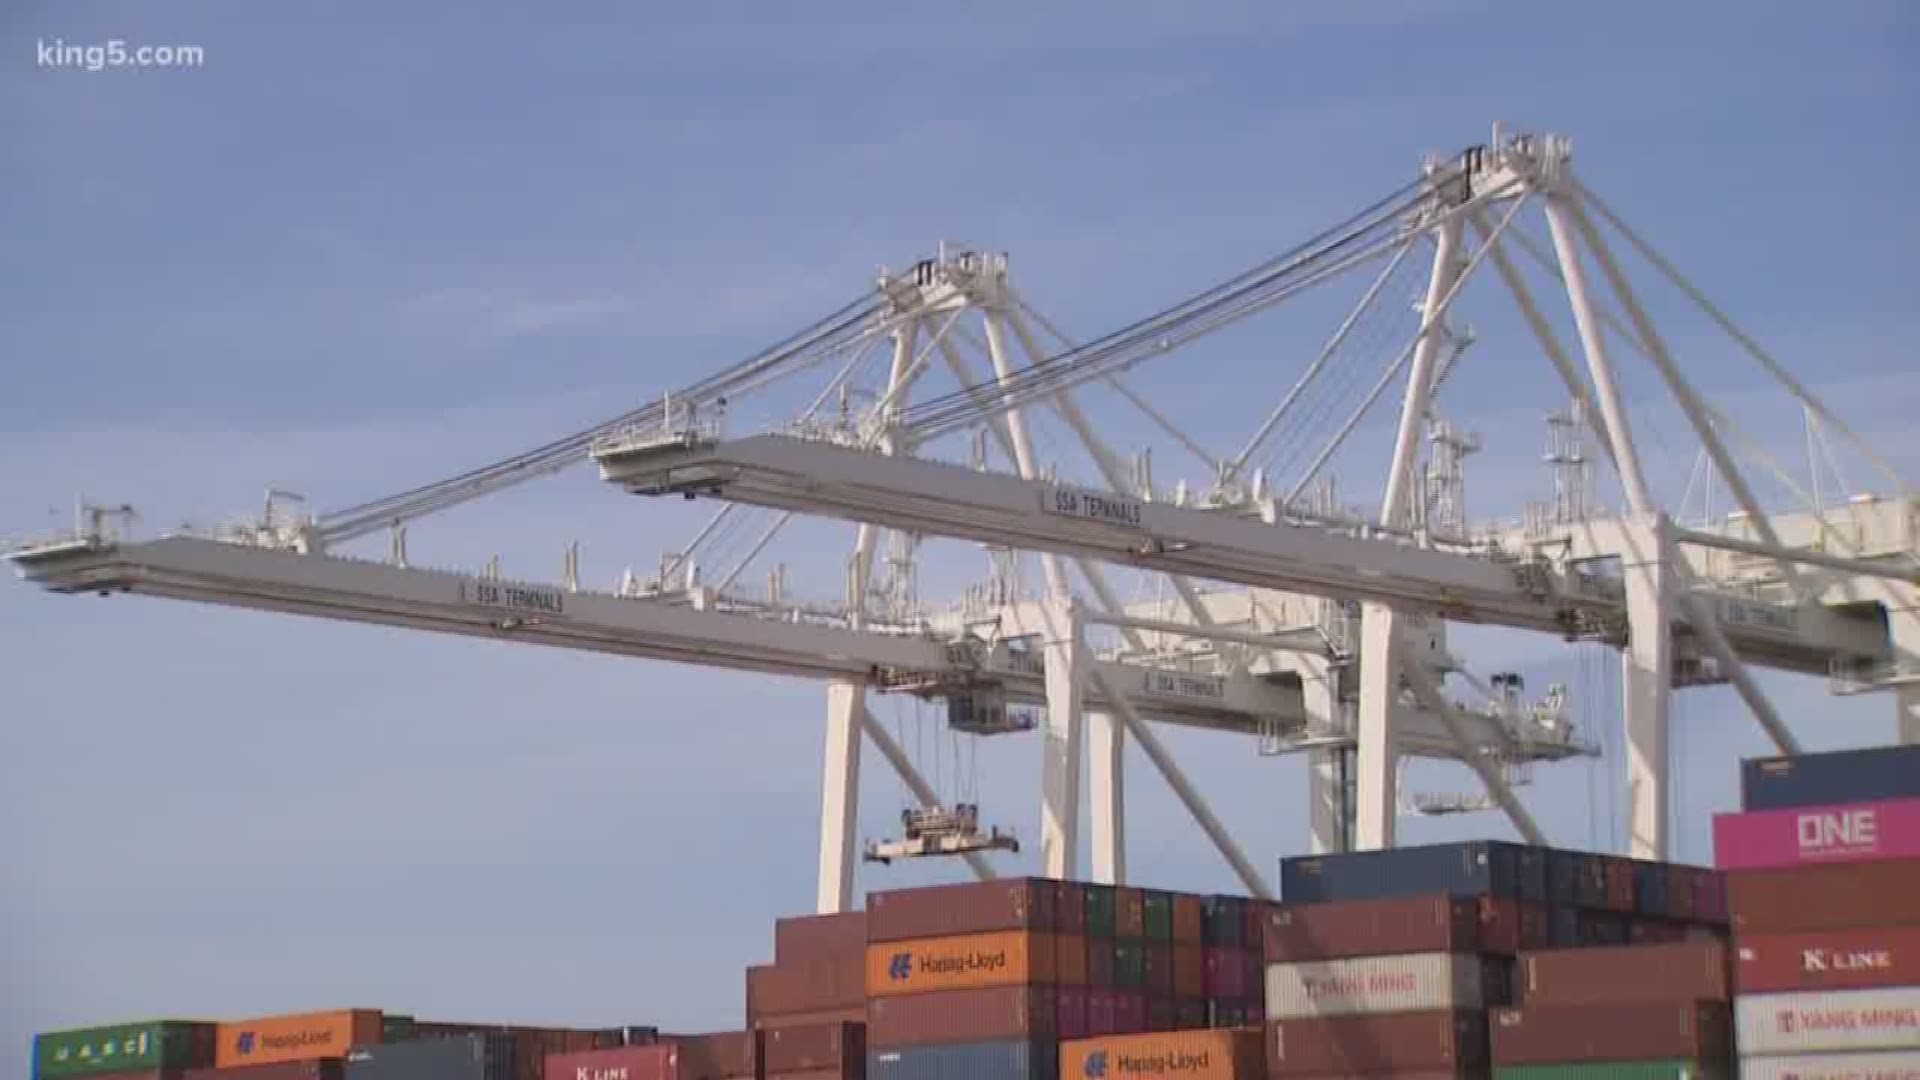 Though it's an ocean apart, the Washington economy is closely tied to China. Imports from the country make up about 60% of the goods coming into Northwest Seaport Alliance ports in Tacoma and Seattle.